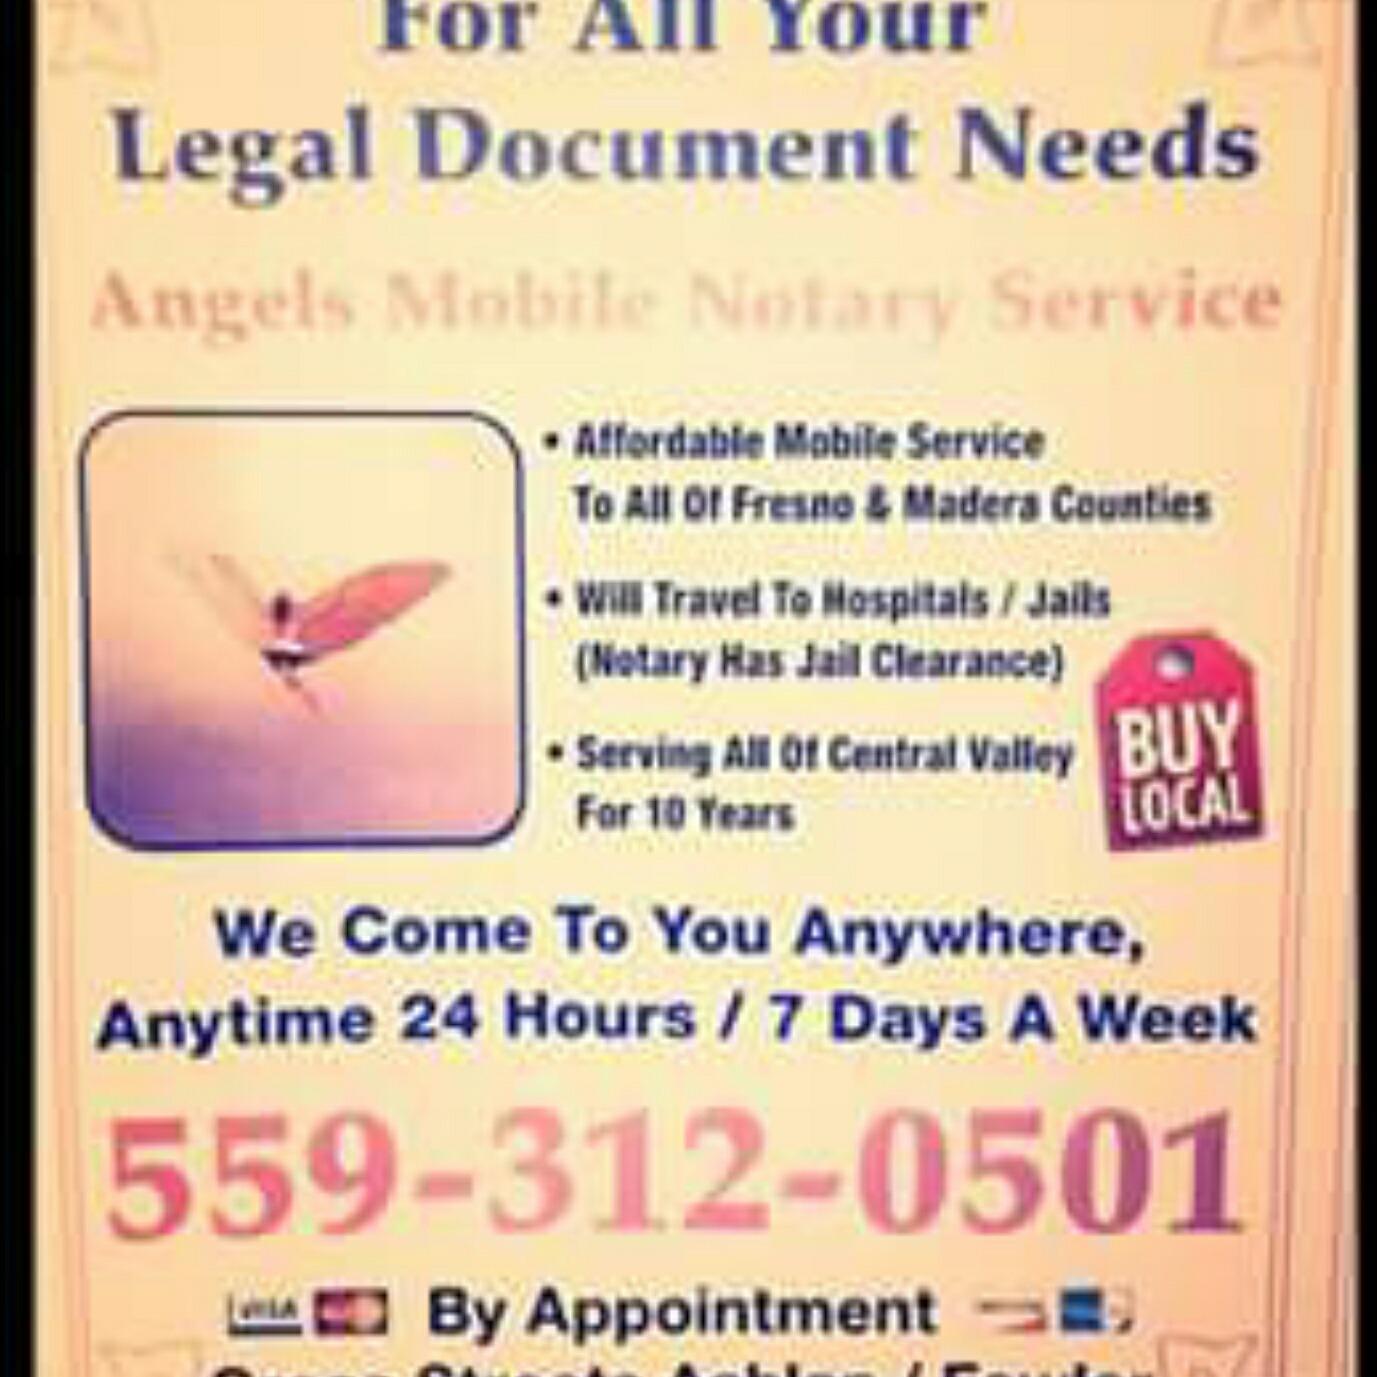 ANGELS MOBILE NOTARY SERVICES Logo